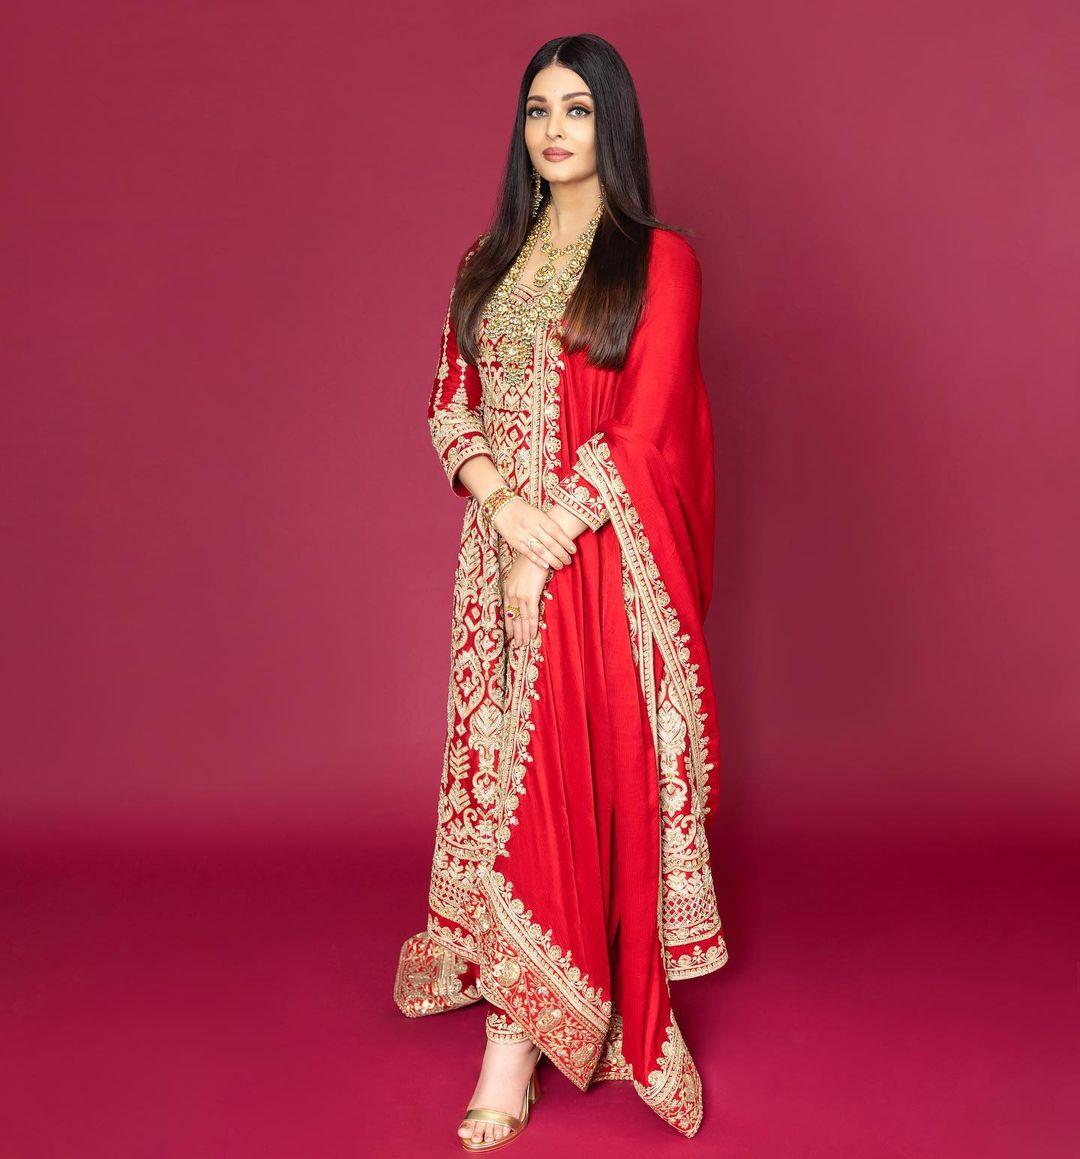 It came with a kurta, well-fitting trousers and a dupatta. The whole kurta was meticulously stitched in gold thread. There were also gold embellishments on the hem of the trousers. The border of the dupatta is also beautifully stitched.